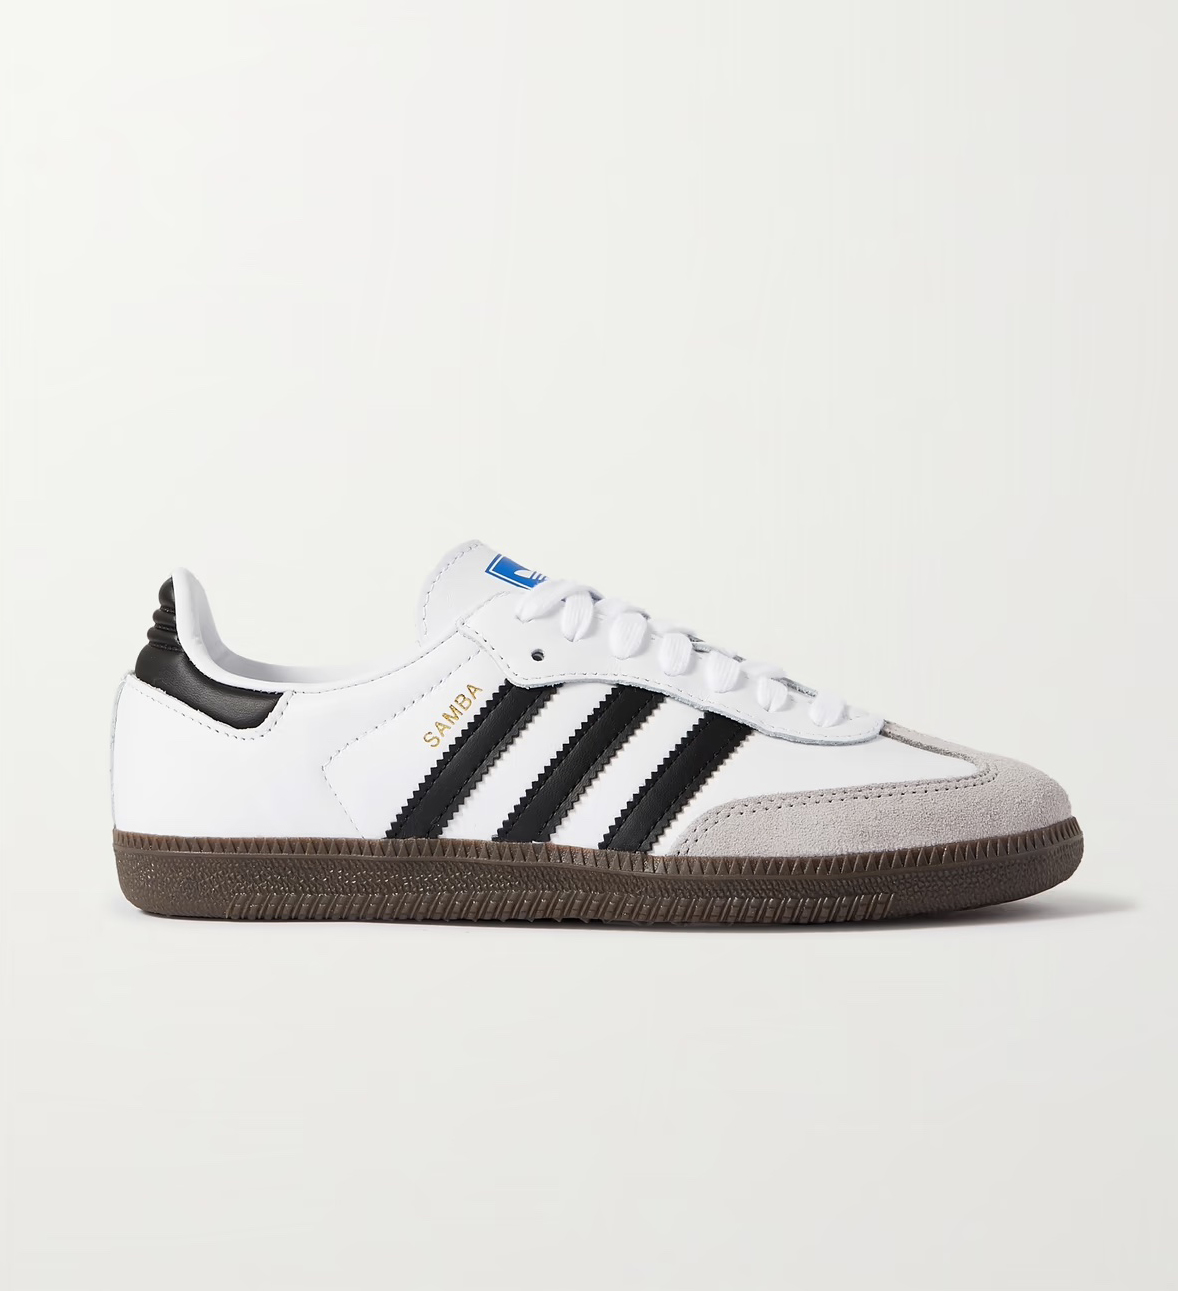 Adidas Originals + Samba OG Leather-based fully and Suede Sneakers